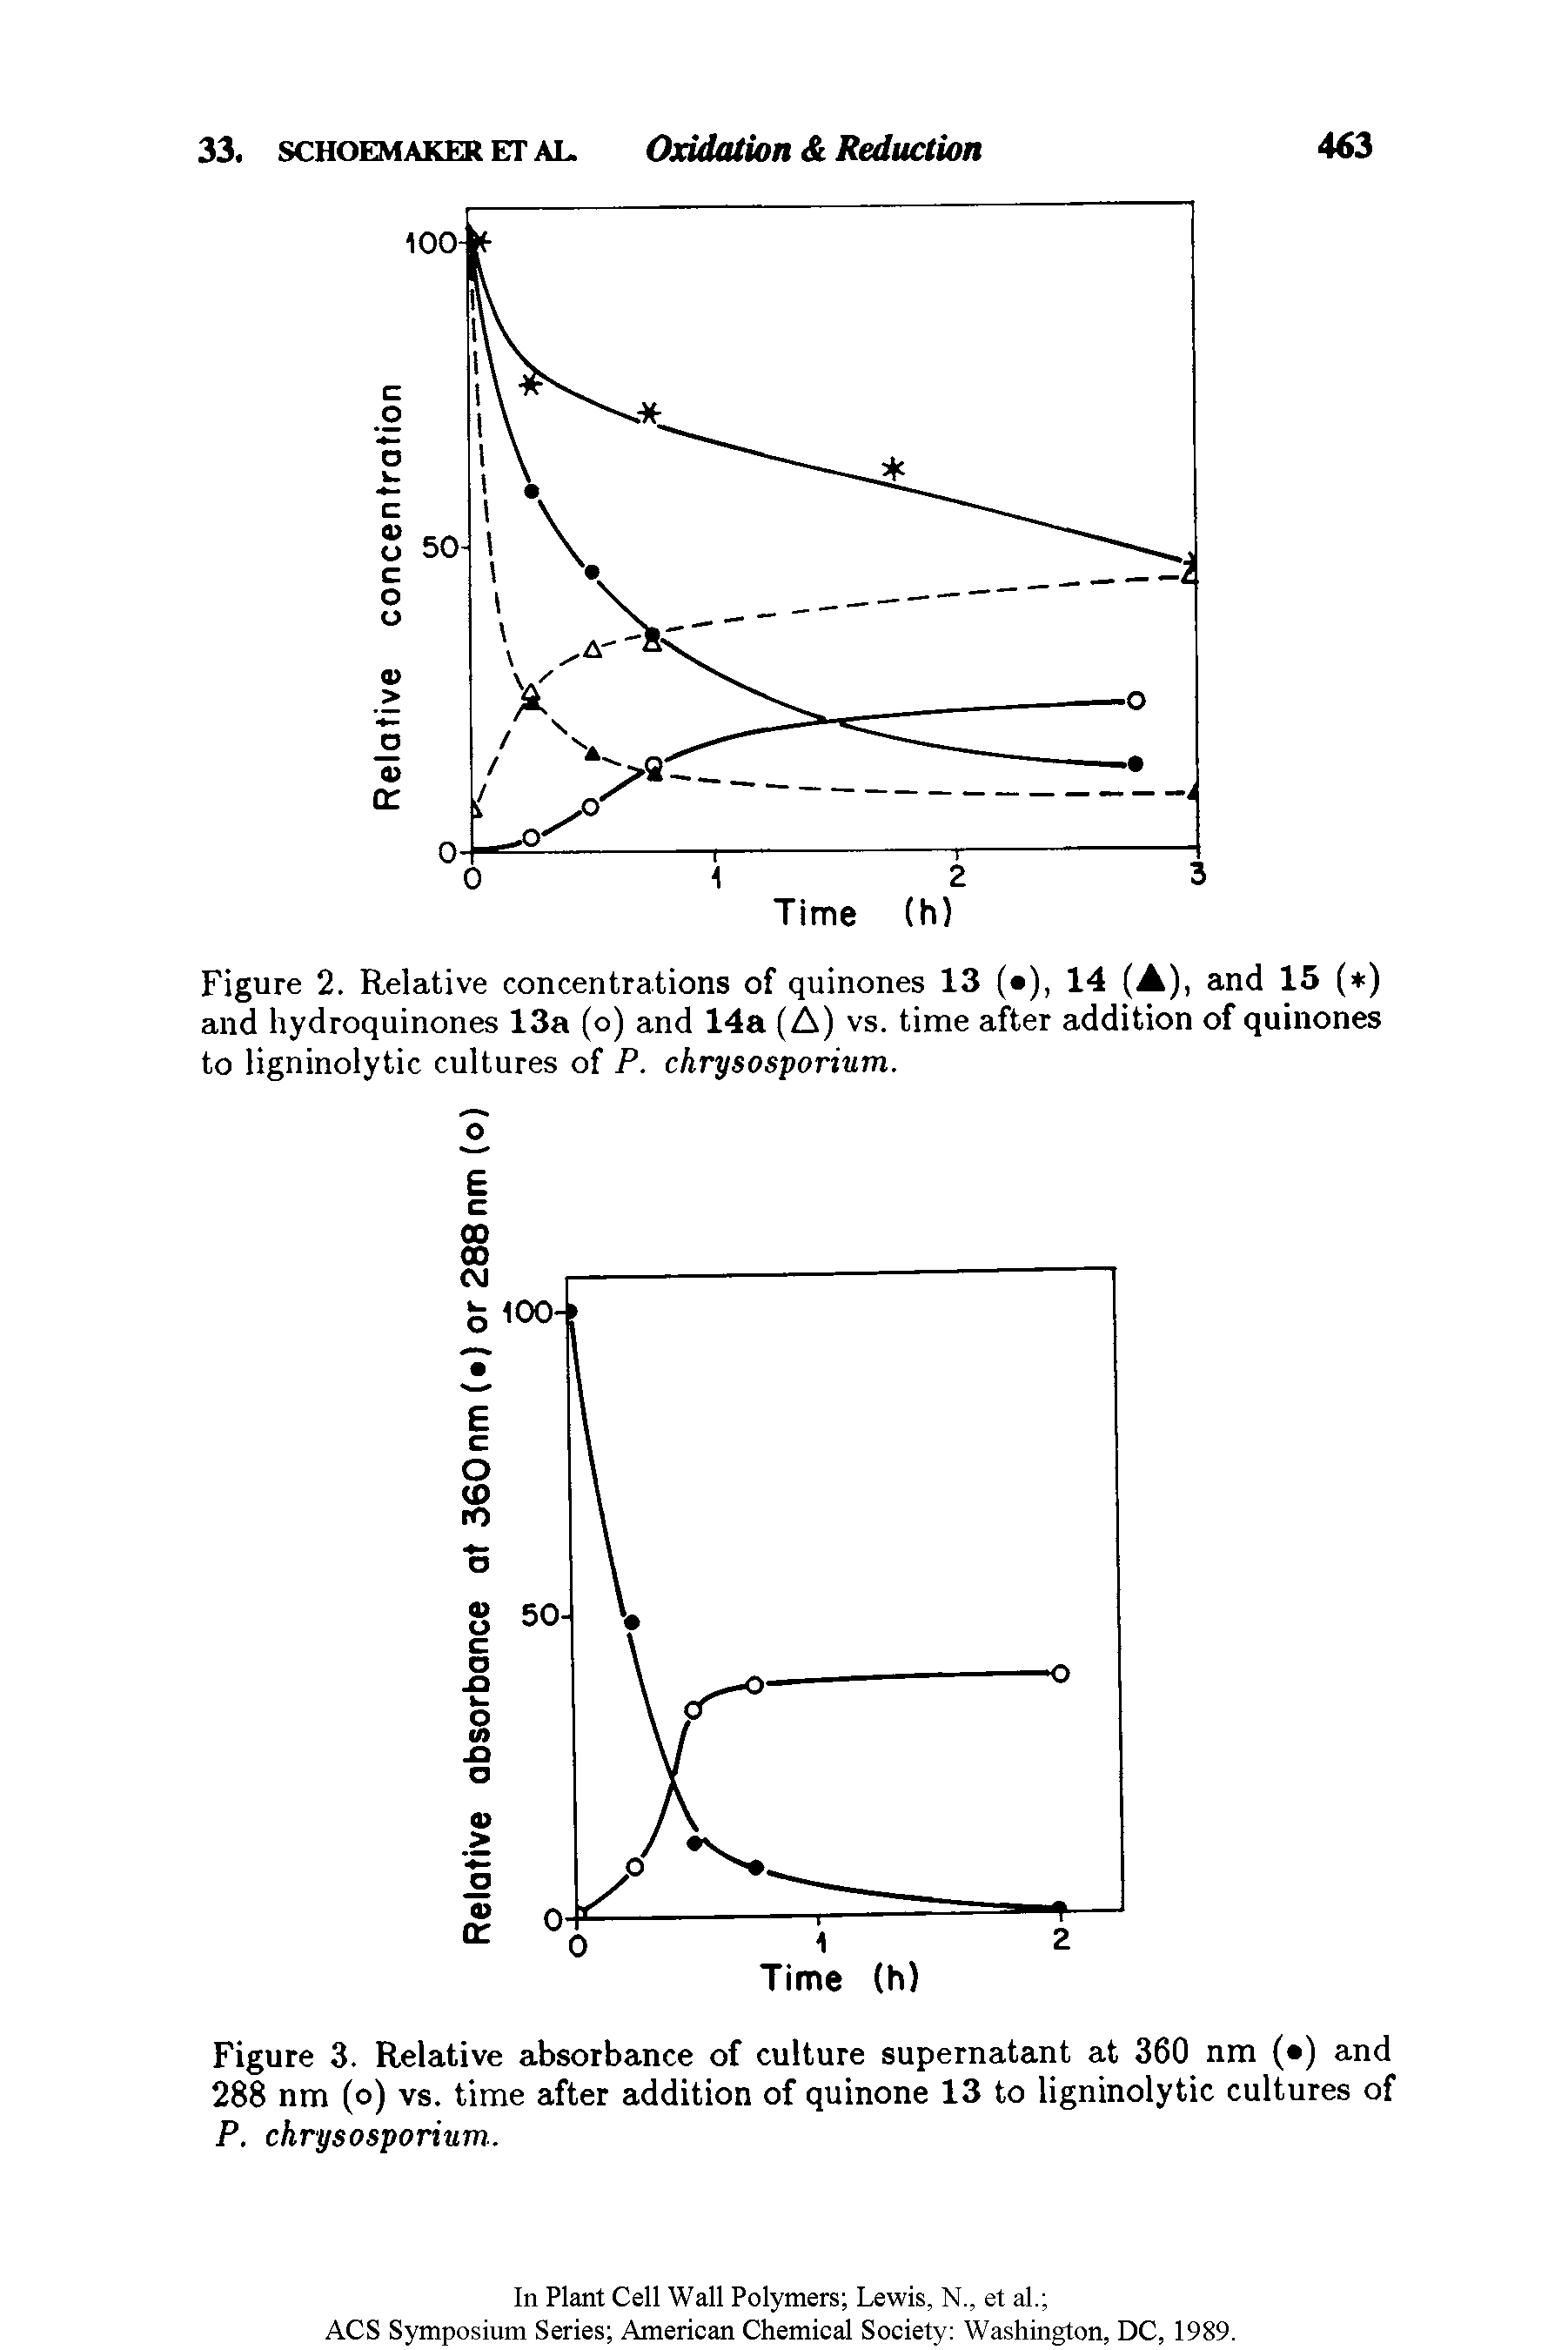 Figure 3. Relative absorbance of culture supernatant at 360 nm ( ) and 288 nm (o) vs. time after addition of quinone 13 to ligninolytic cultures of P. chrysosporium..